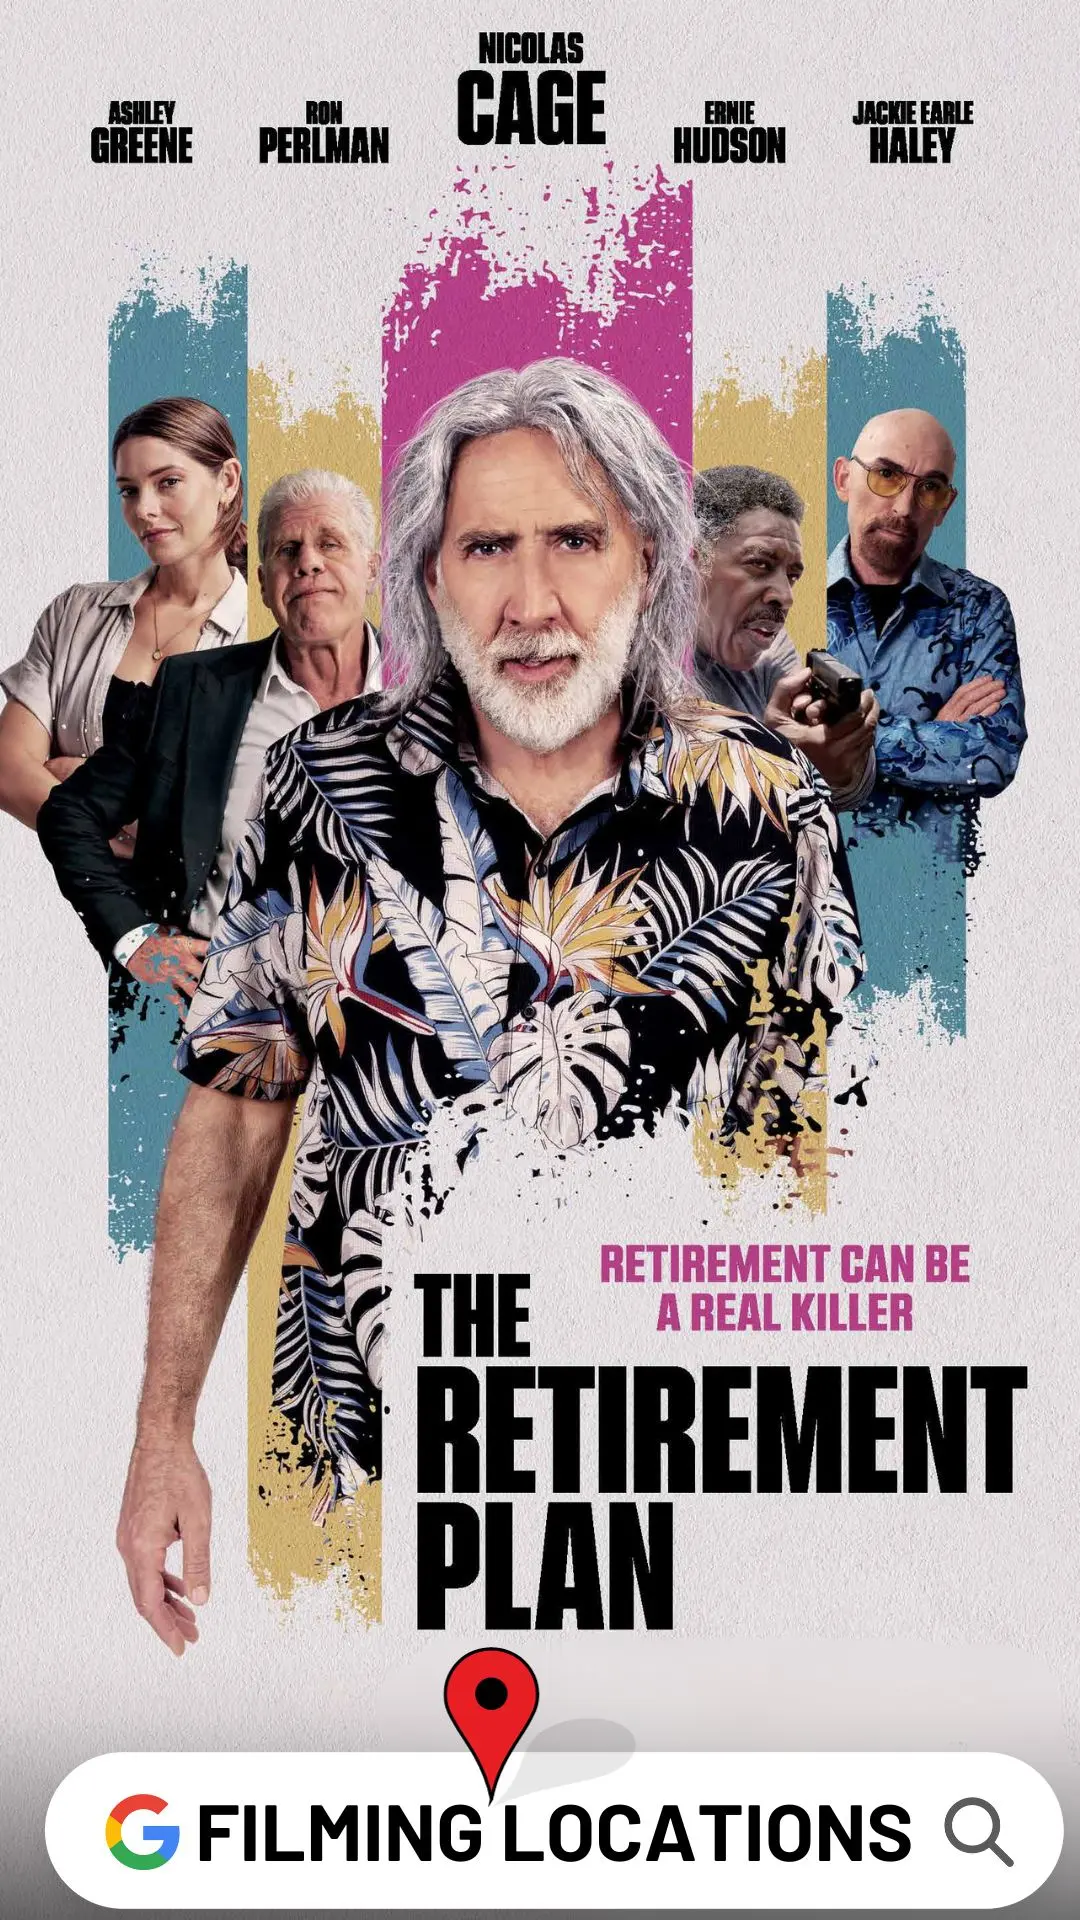 The Retirement Plan Filming Locations